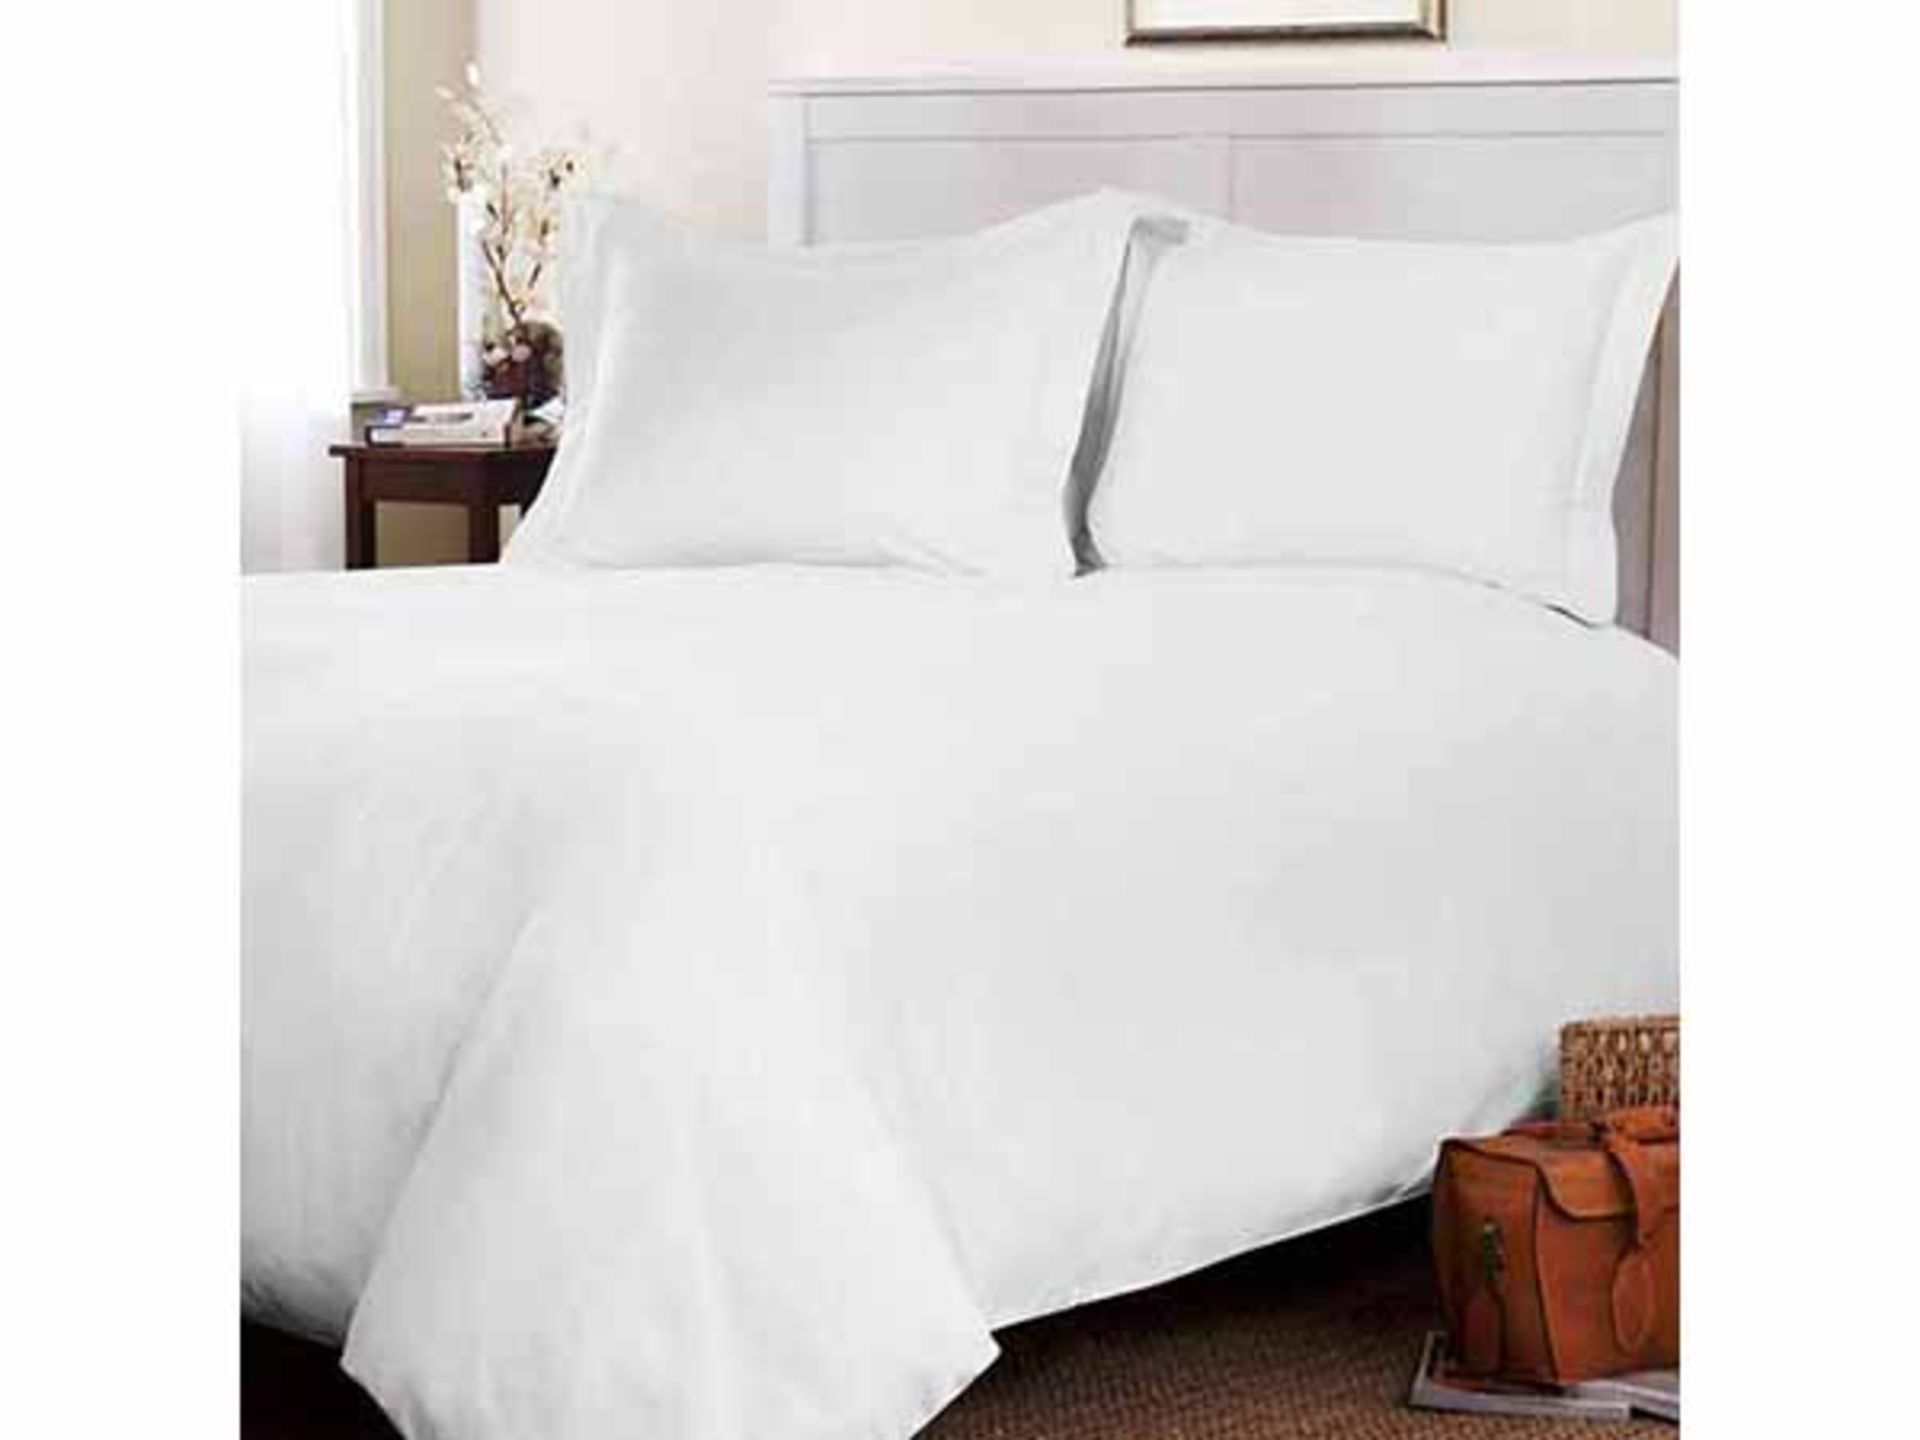 V *TRADE QTY* Brand New Luxury King Size Plain Dye Fitted Sheet White X 5 YOUR BID PRICE TO BE